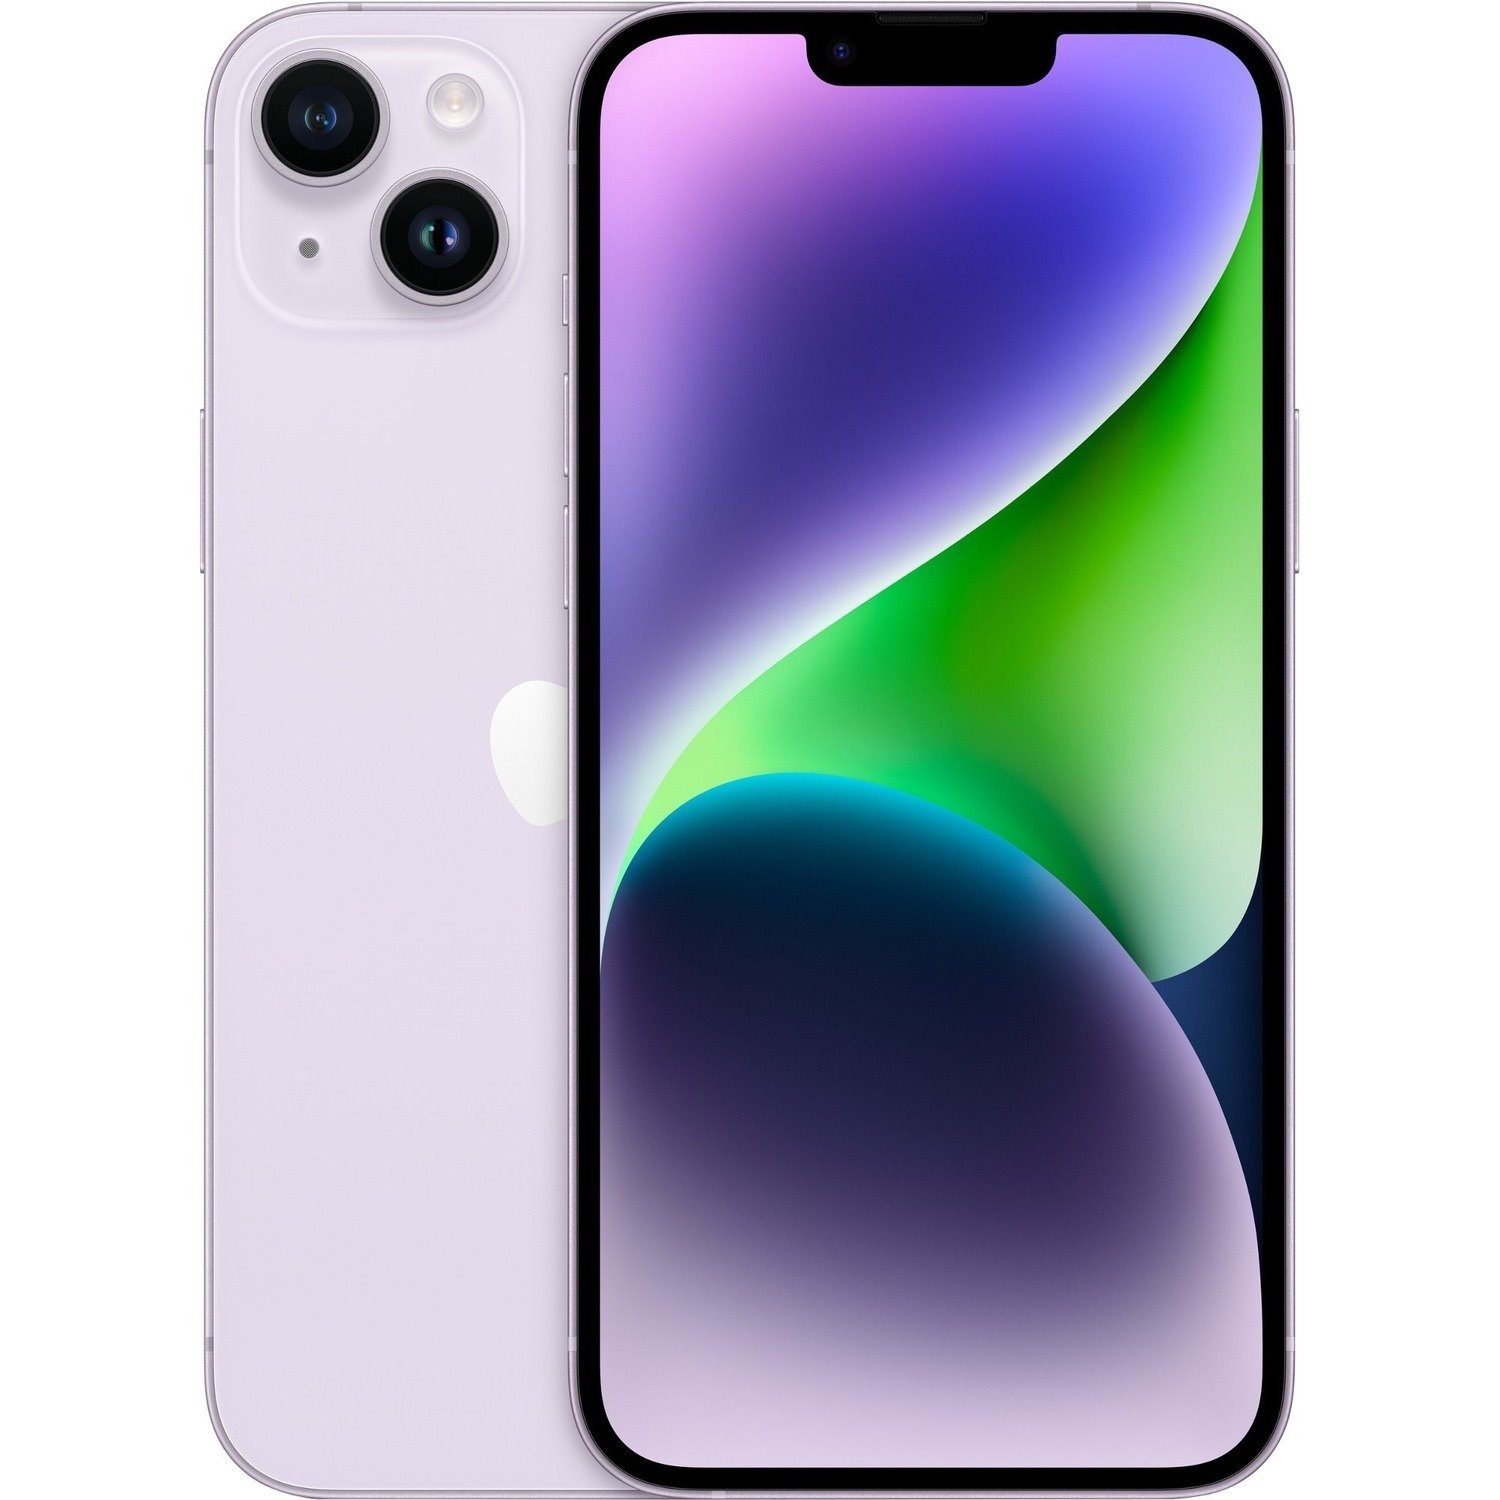 Apple iPhone 14 A2882 256 GB Smartphone - 6.1" OLED 2532 x 1170 - Hexa-core (AvalancheDual-core (2 Core) 3.23 GHz + Blizzard Quad-core (4 Core) 1.82 GHz - 6 GB RAM - iOS 16 - 5G - Purple